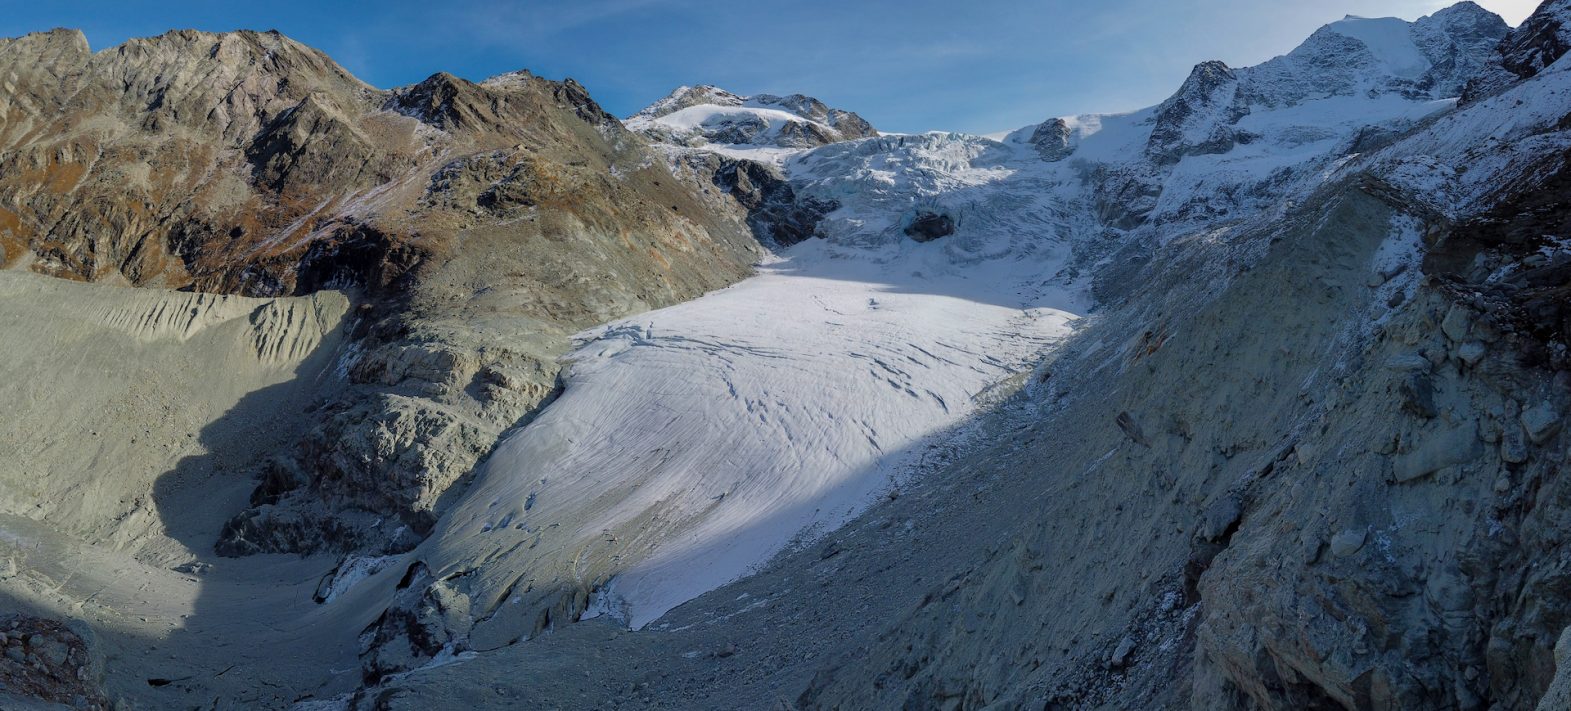 IPGP researchers search for nanoparticles on glaciers